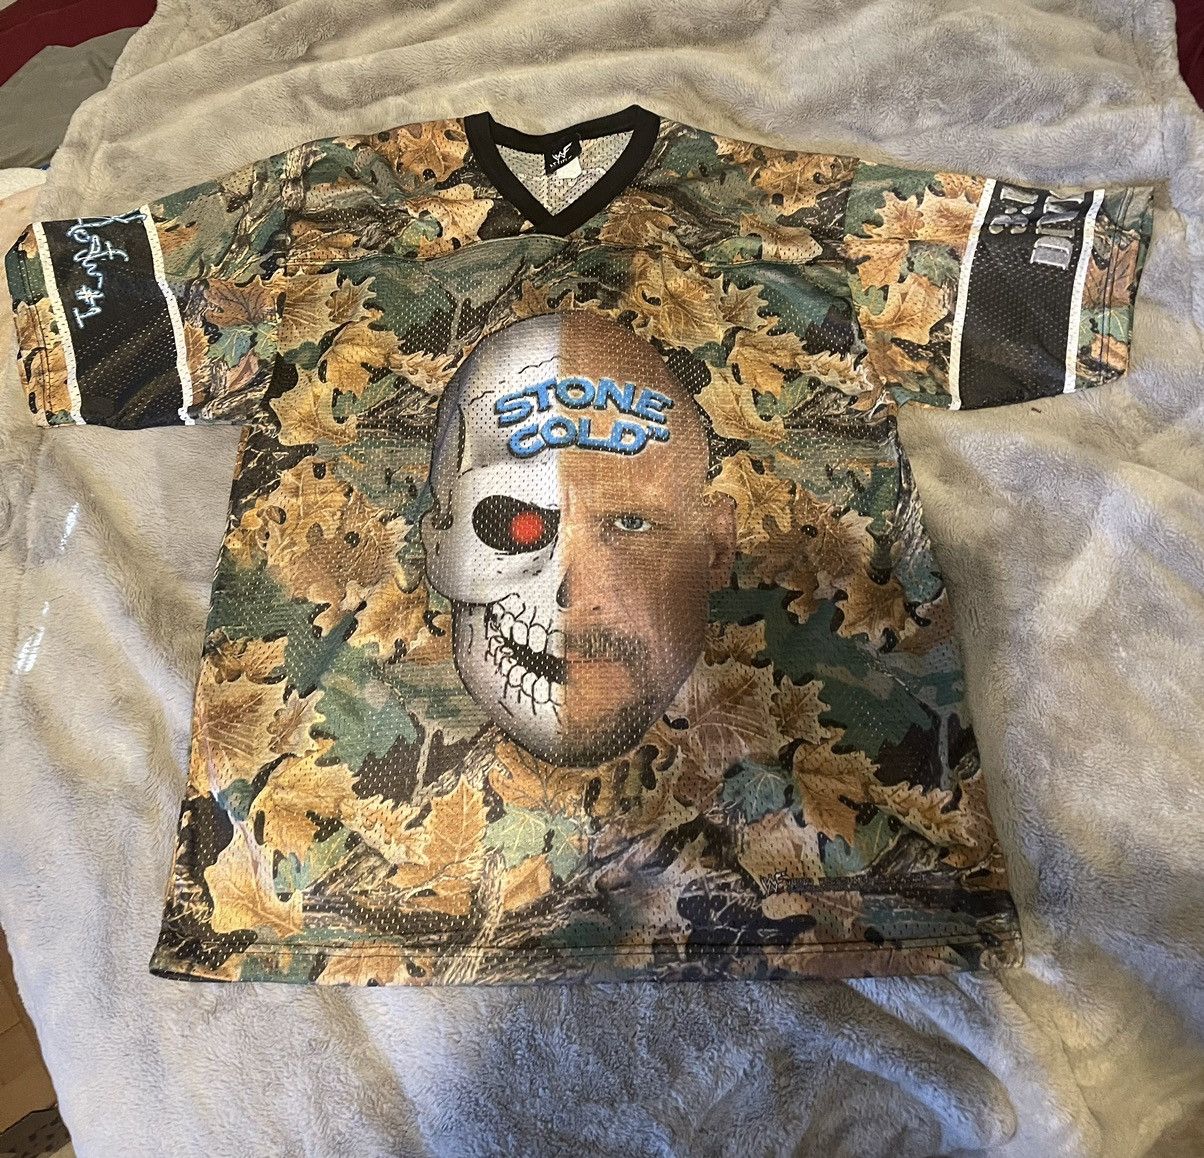 VINTAGE WWF STEVE STONE COLD AUSTIN FOOTBALL CAMO MESH JERSEY IN SIZE XL